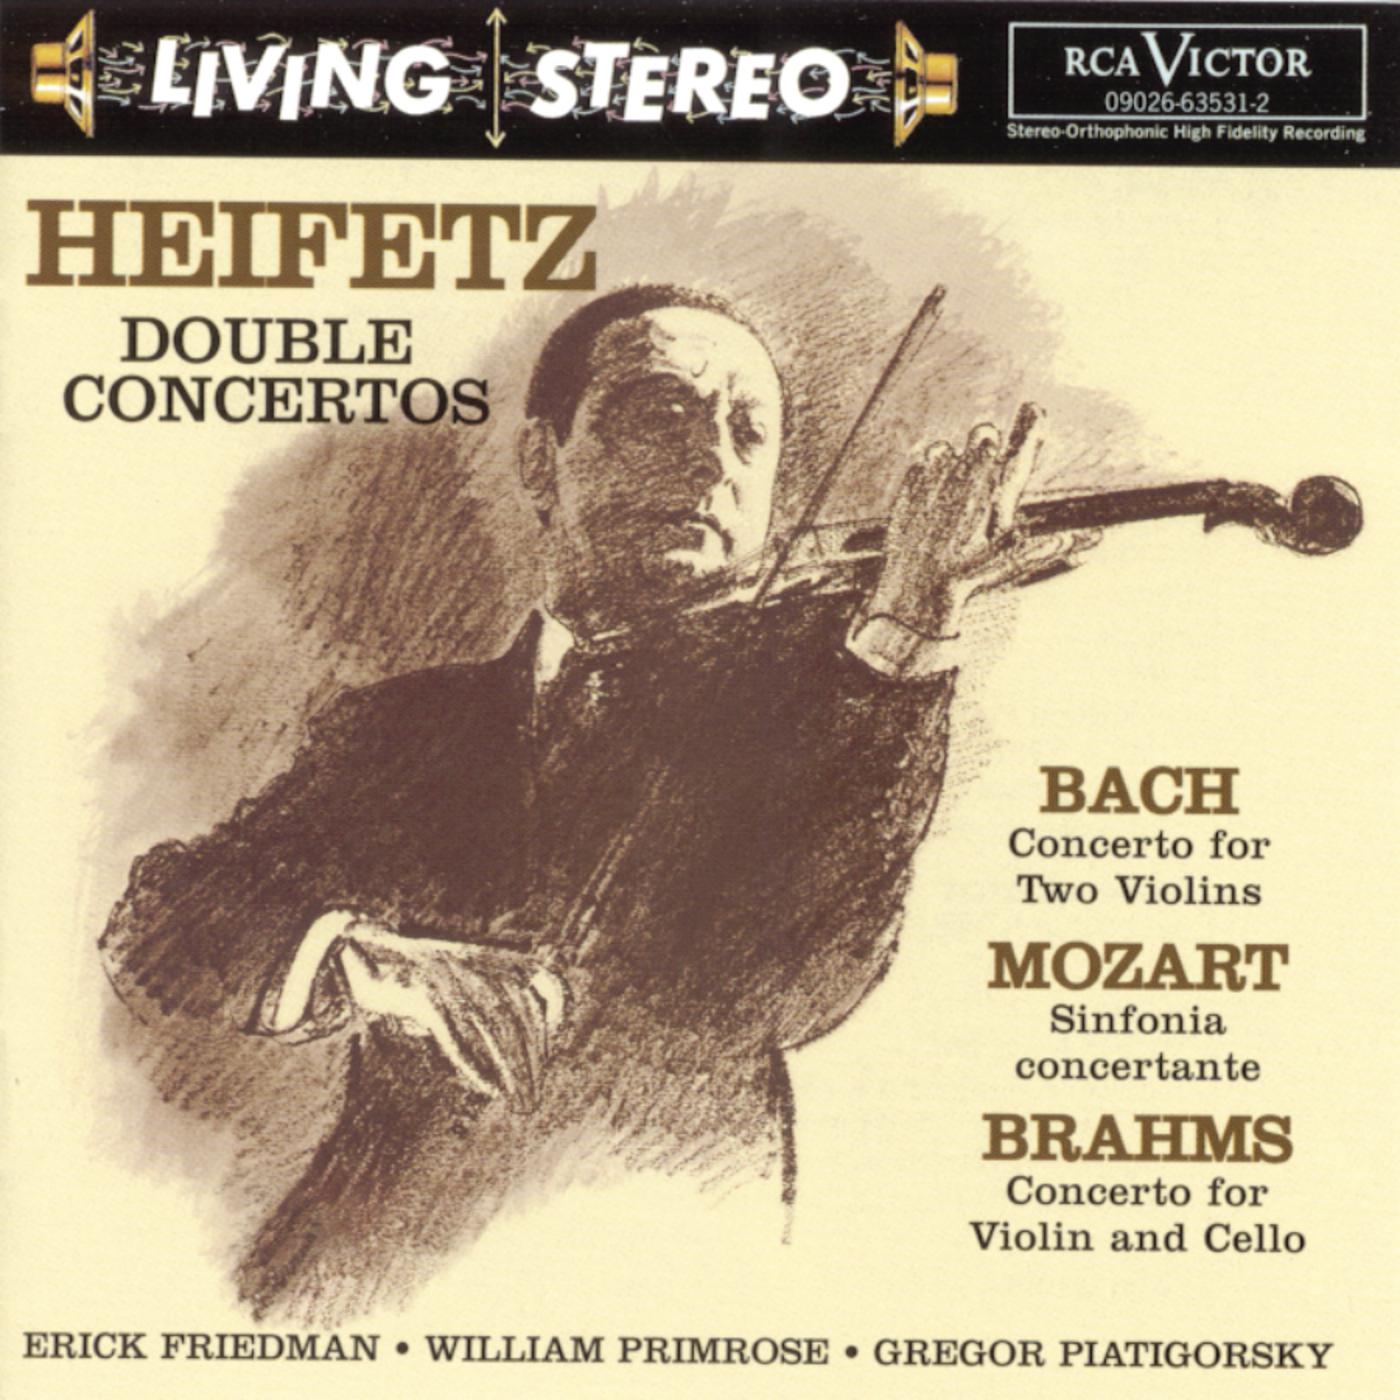 bach-concerto-for-two-violins-mozart-sinfonia-concertante-brahms